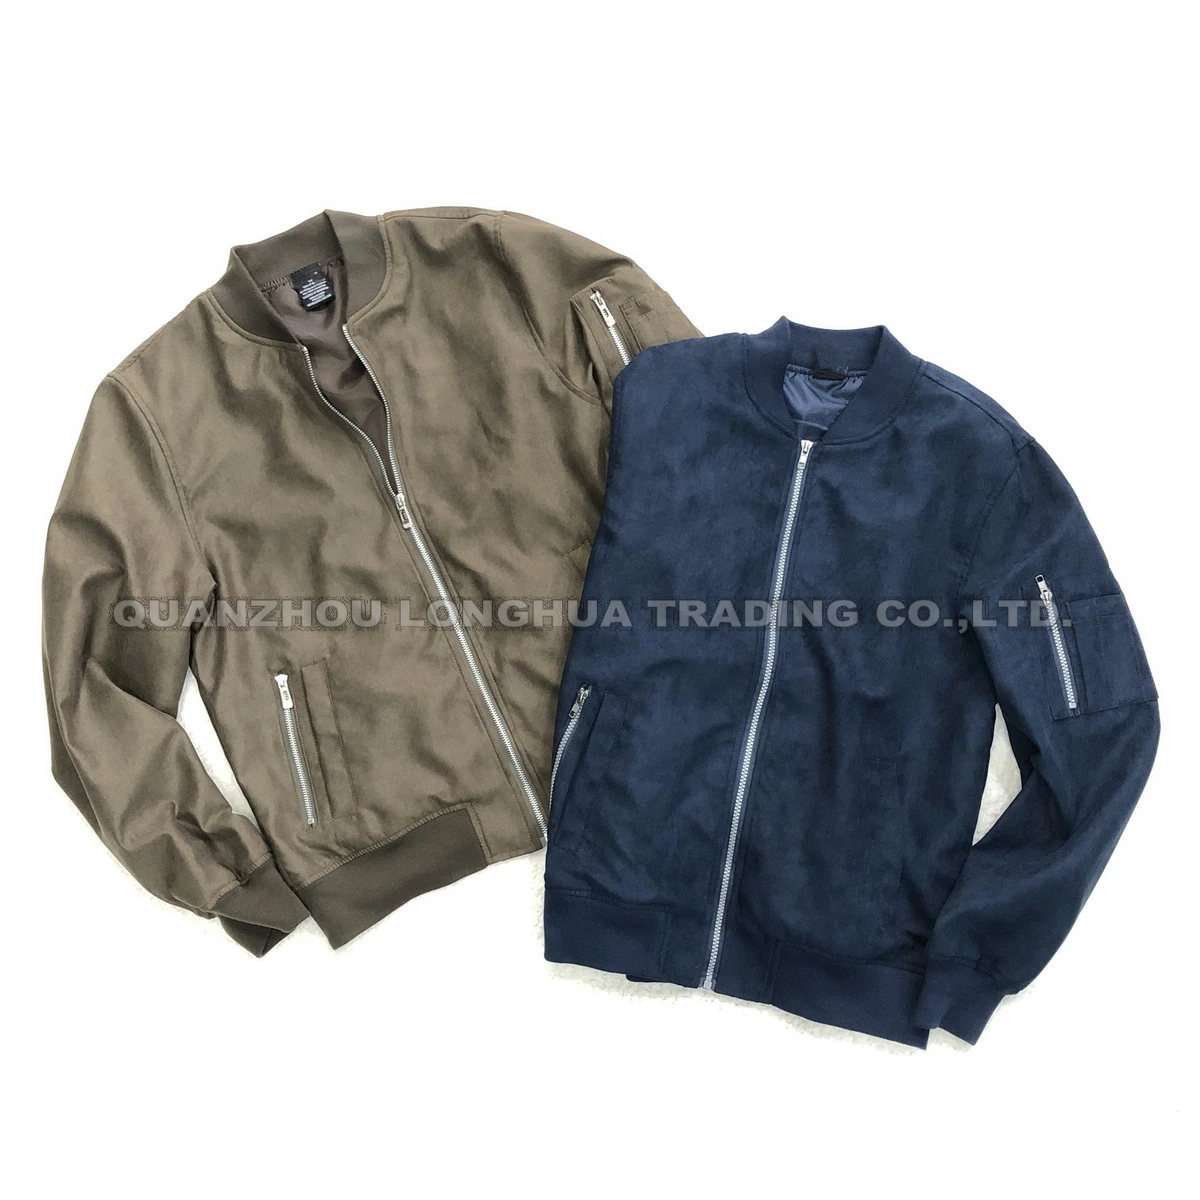 Men Jacket Boy Jacket Woven New Suede Padding Apparel Fashion Clothing Brown Navy Outdoor Clothes